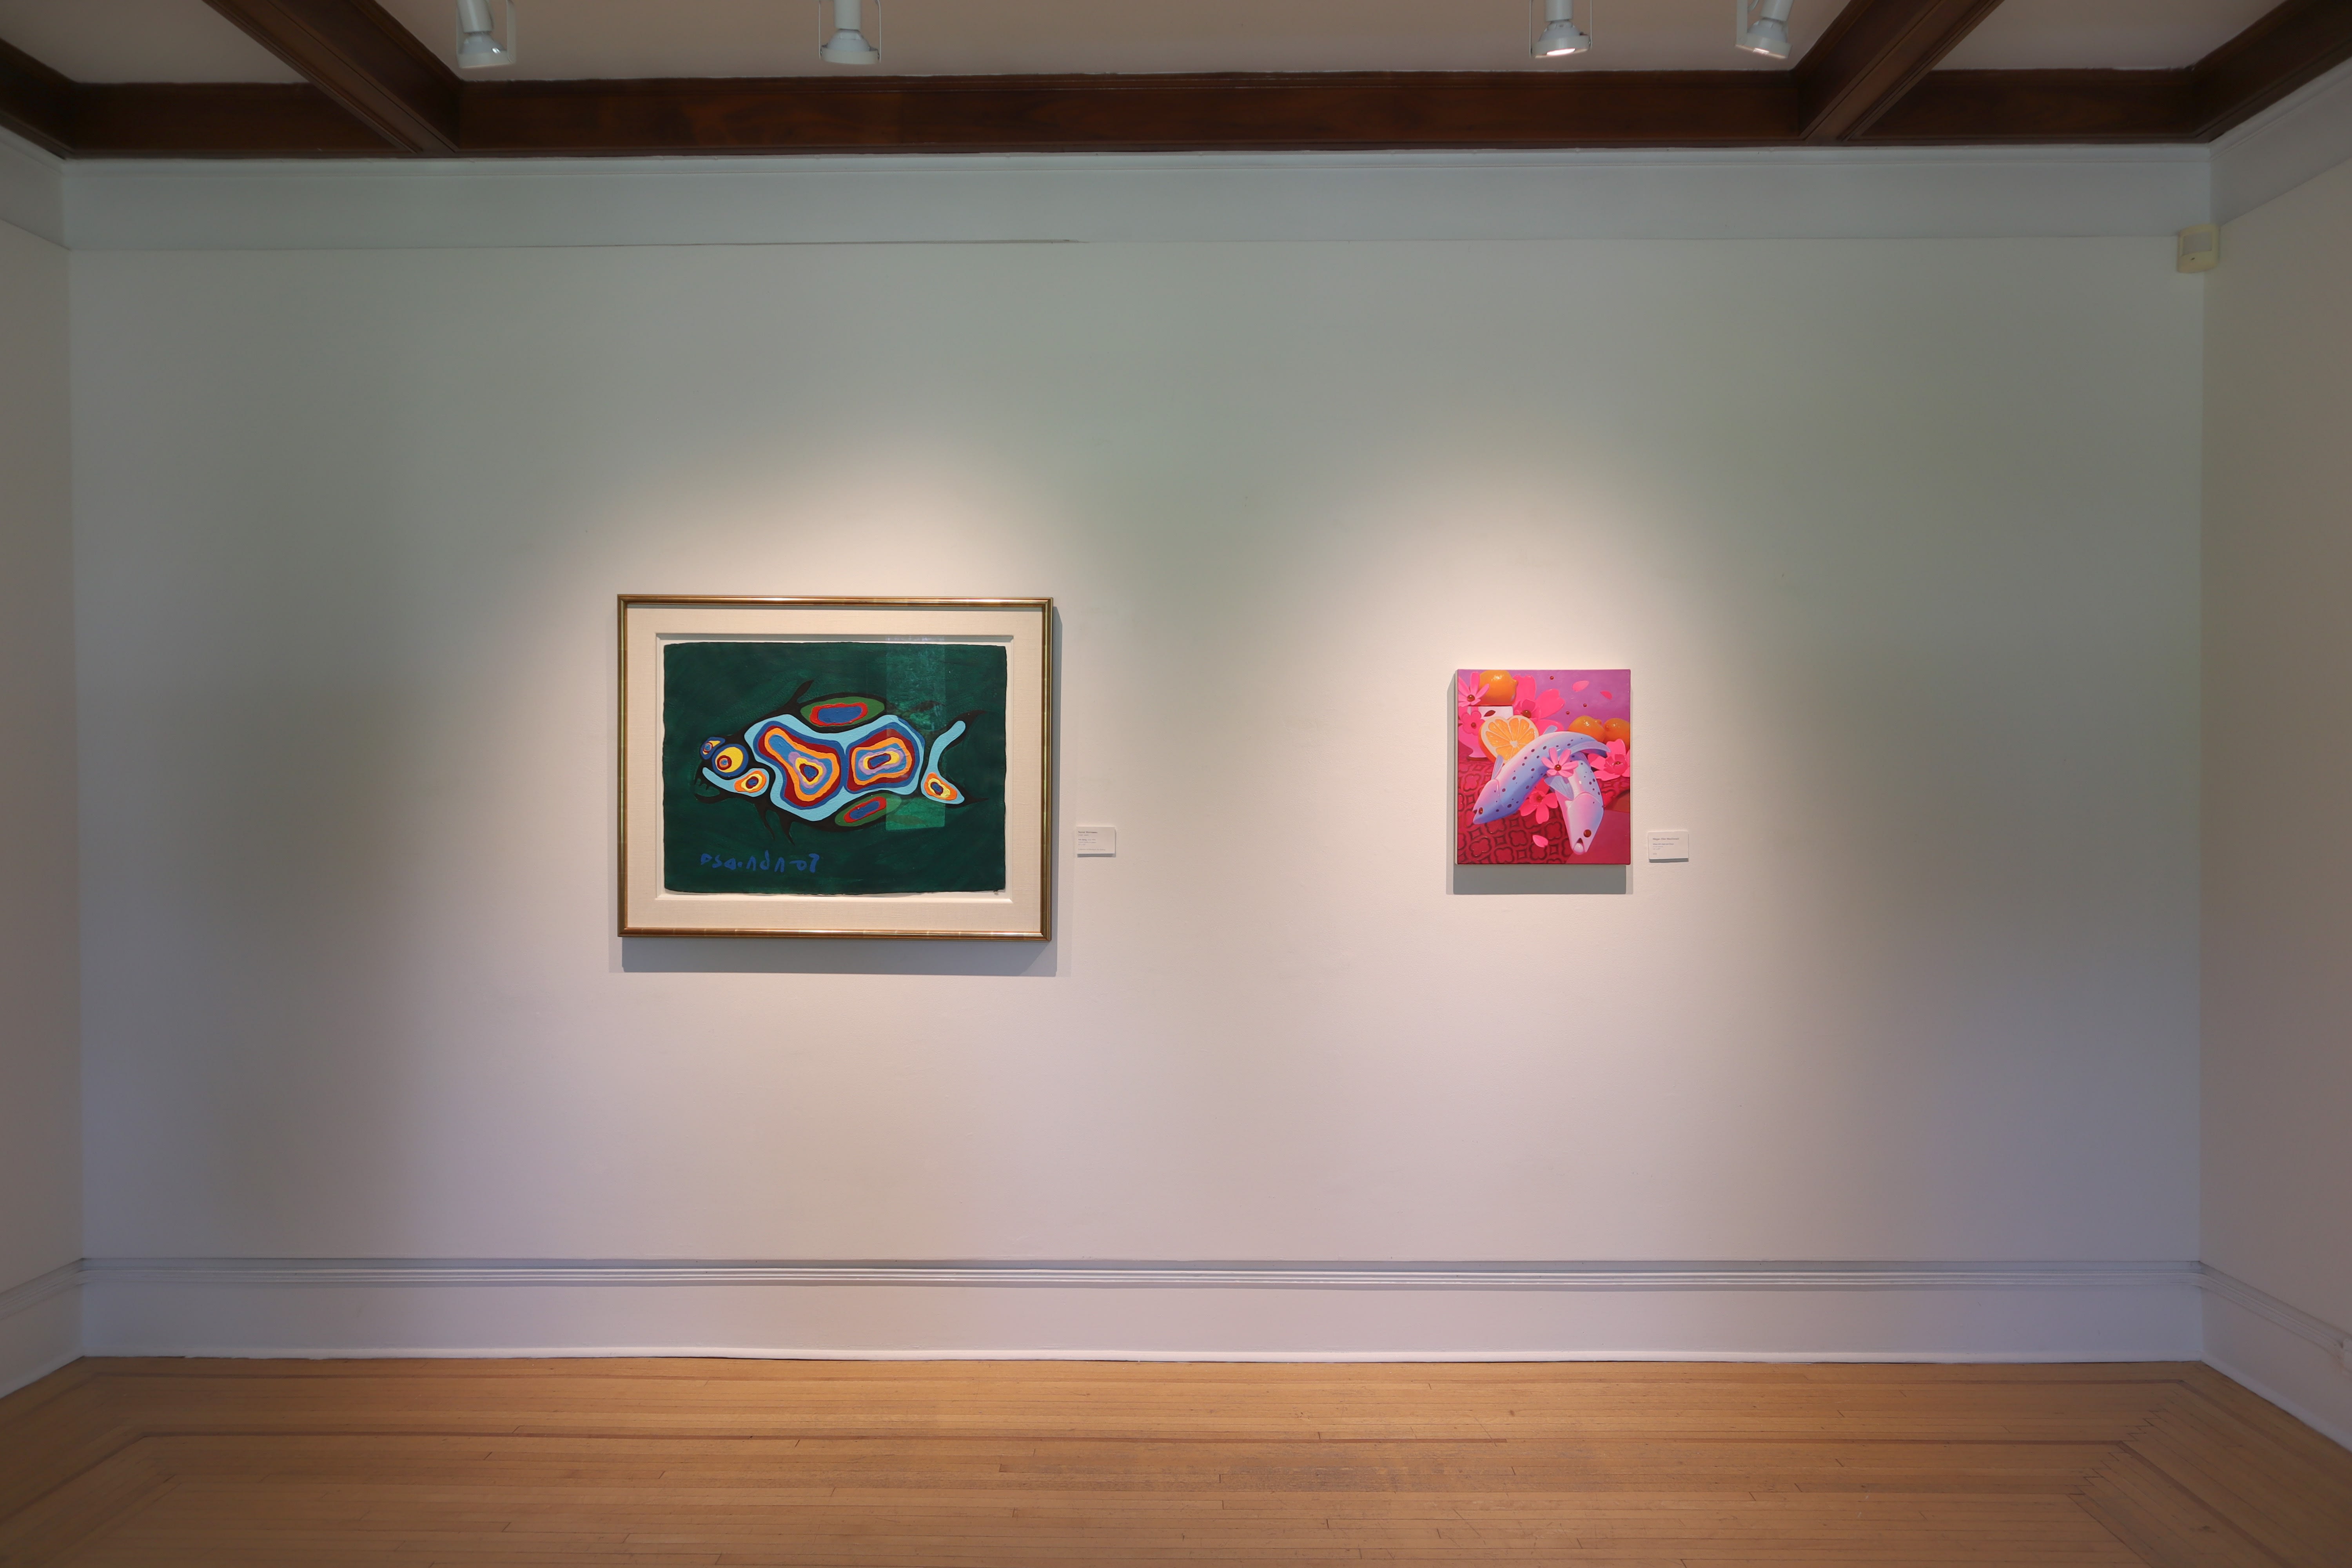 Installation view of two paintings at the Glenhyrst.